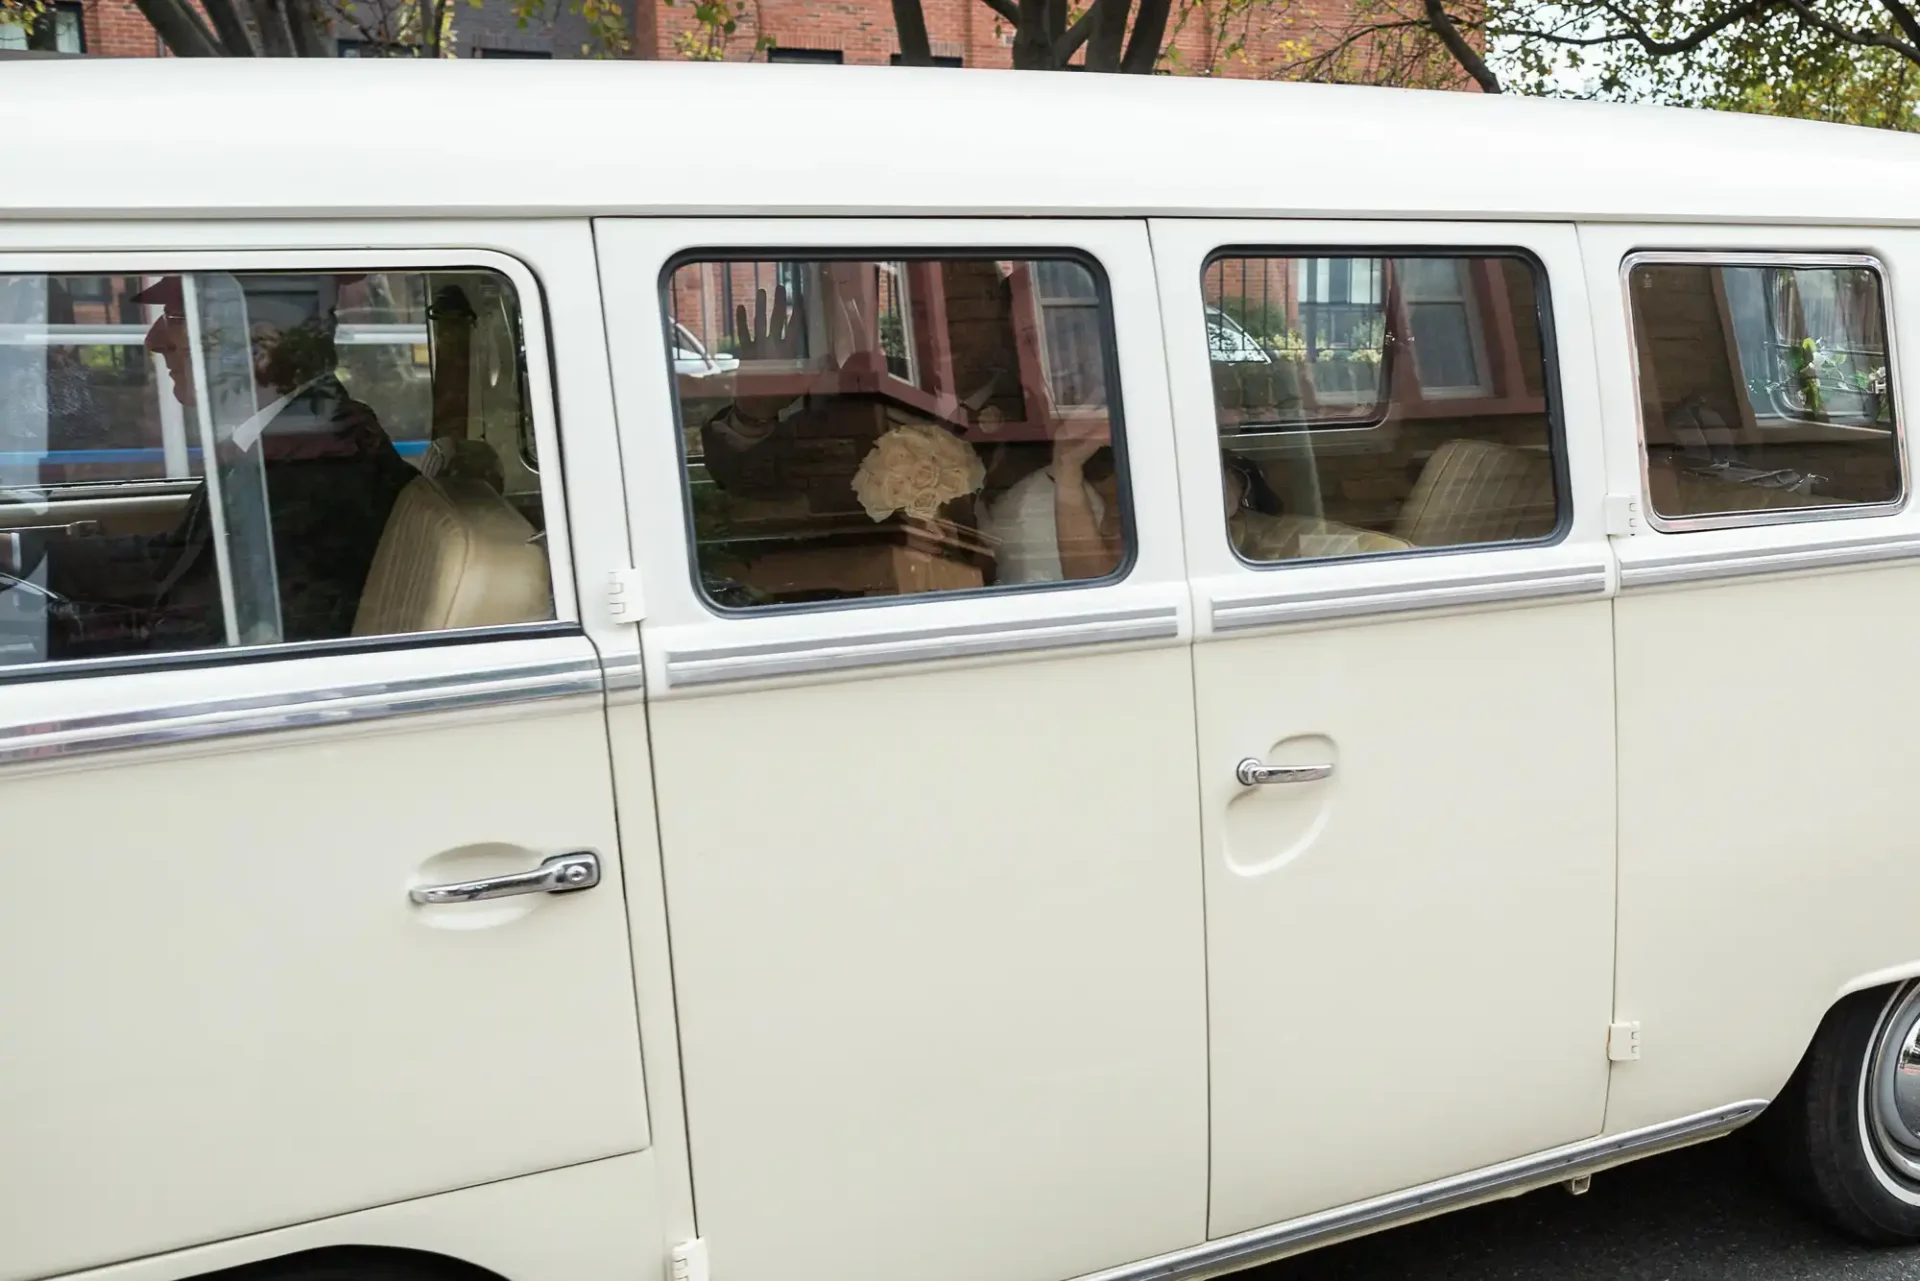 Side view of a cream-colored vintage volkswagen bus with multiple windows, parked on a city street.